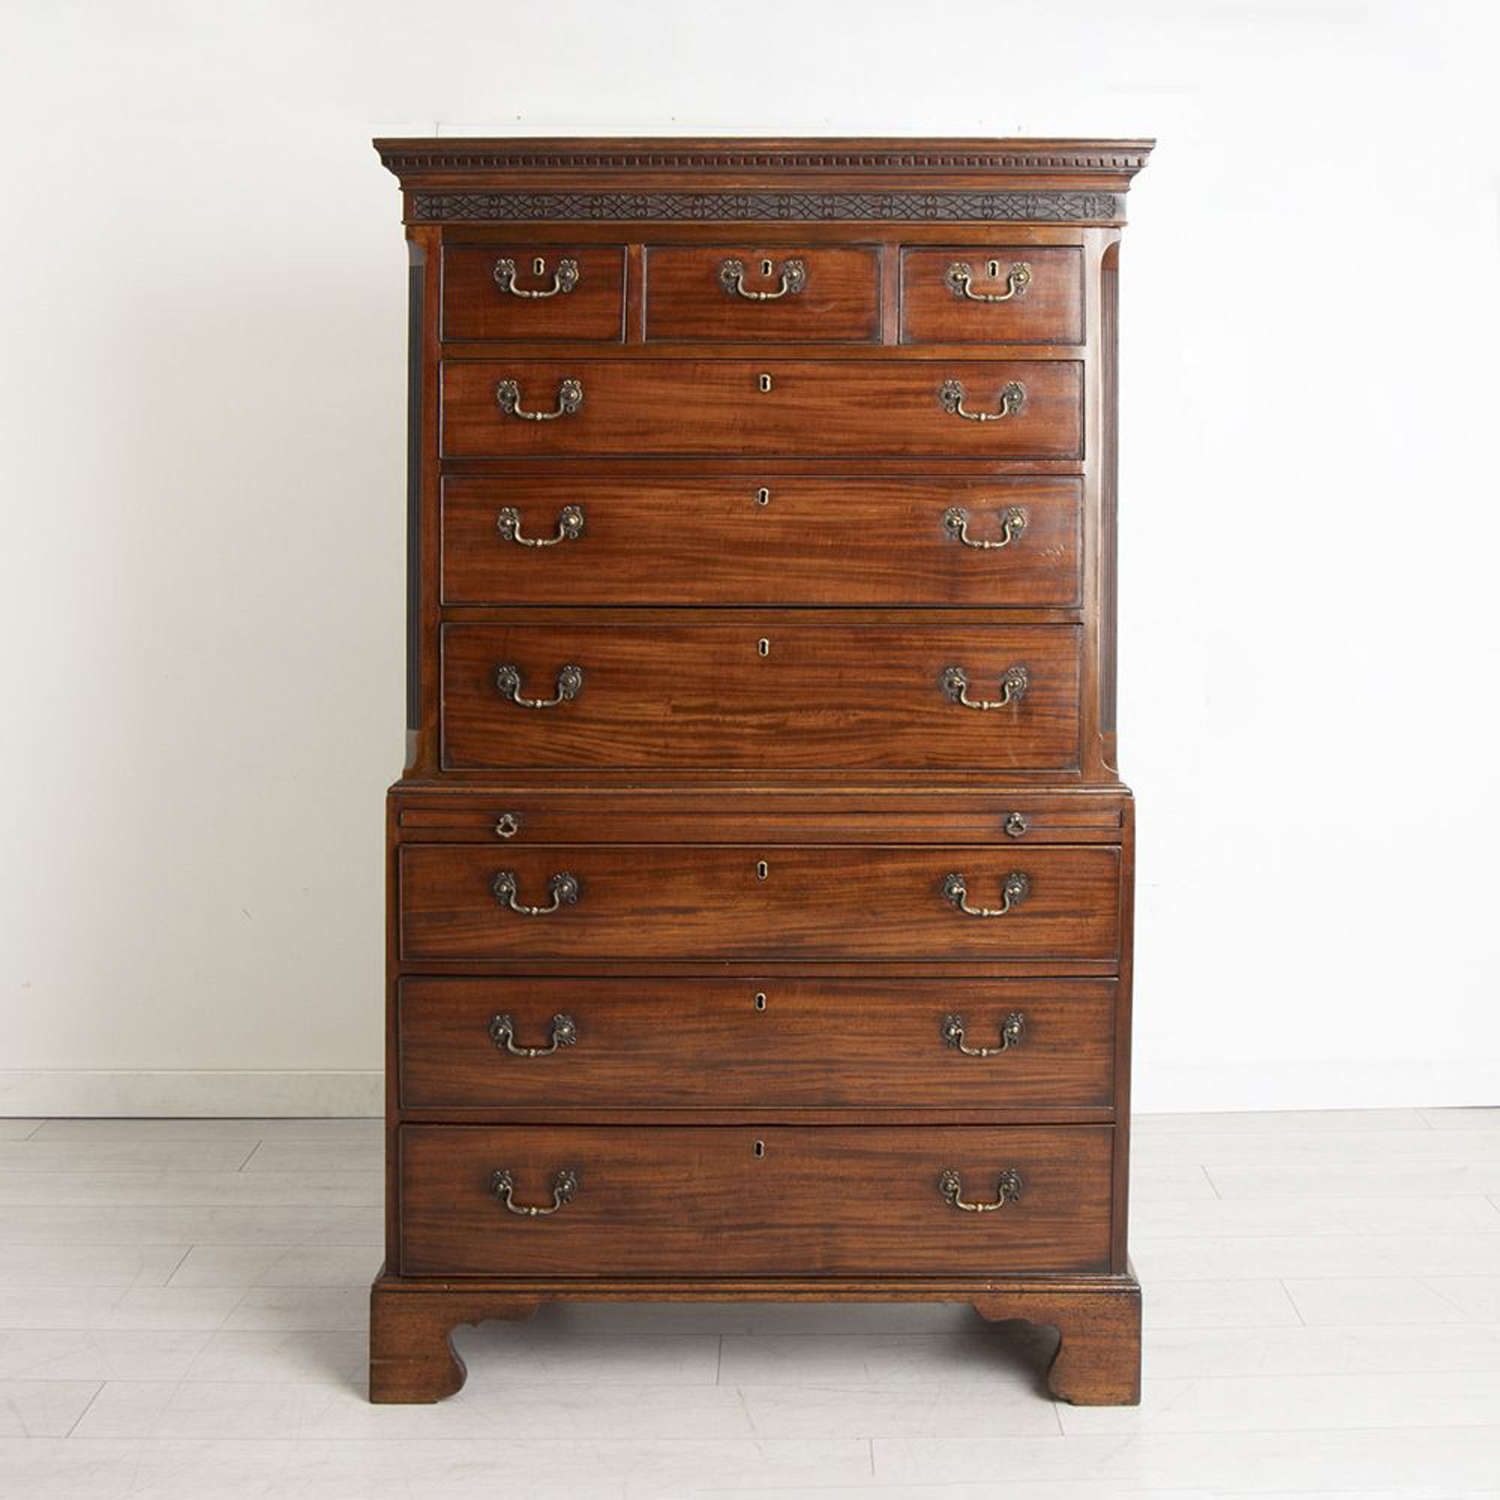 Early Georgian Mahogany Chest on Chest